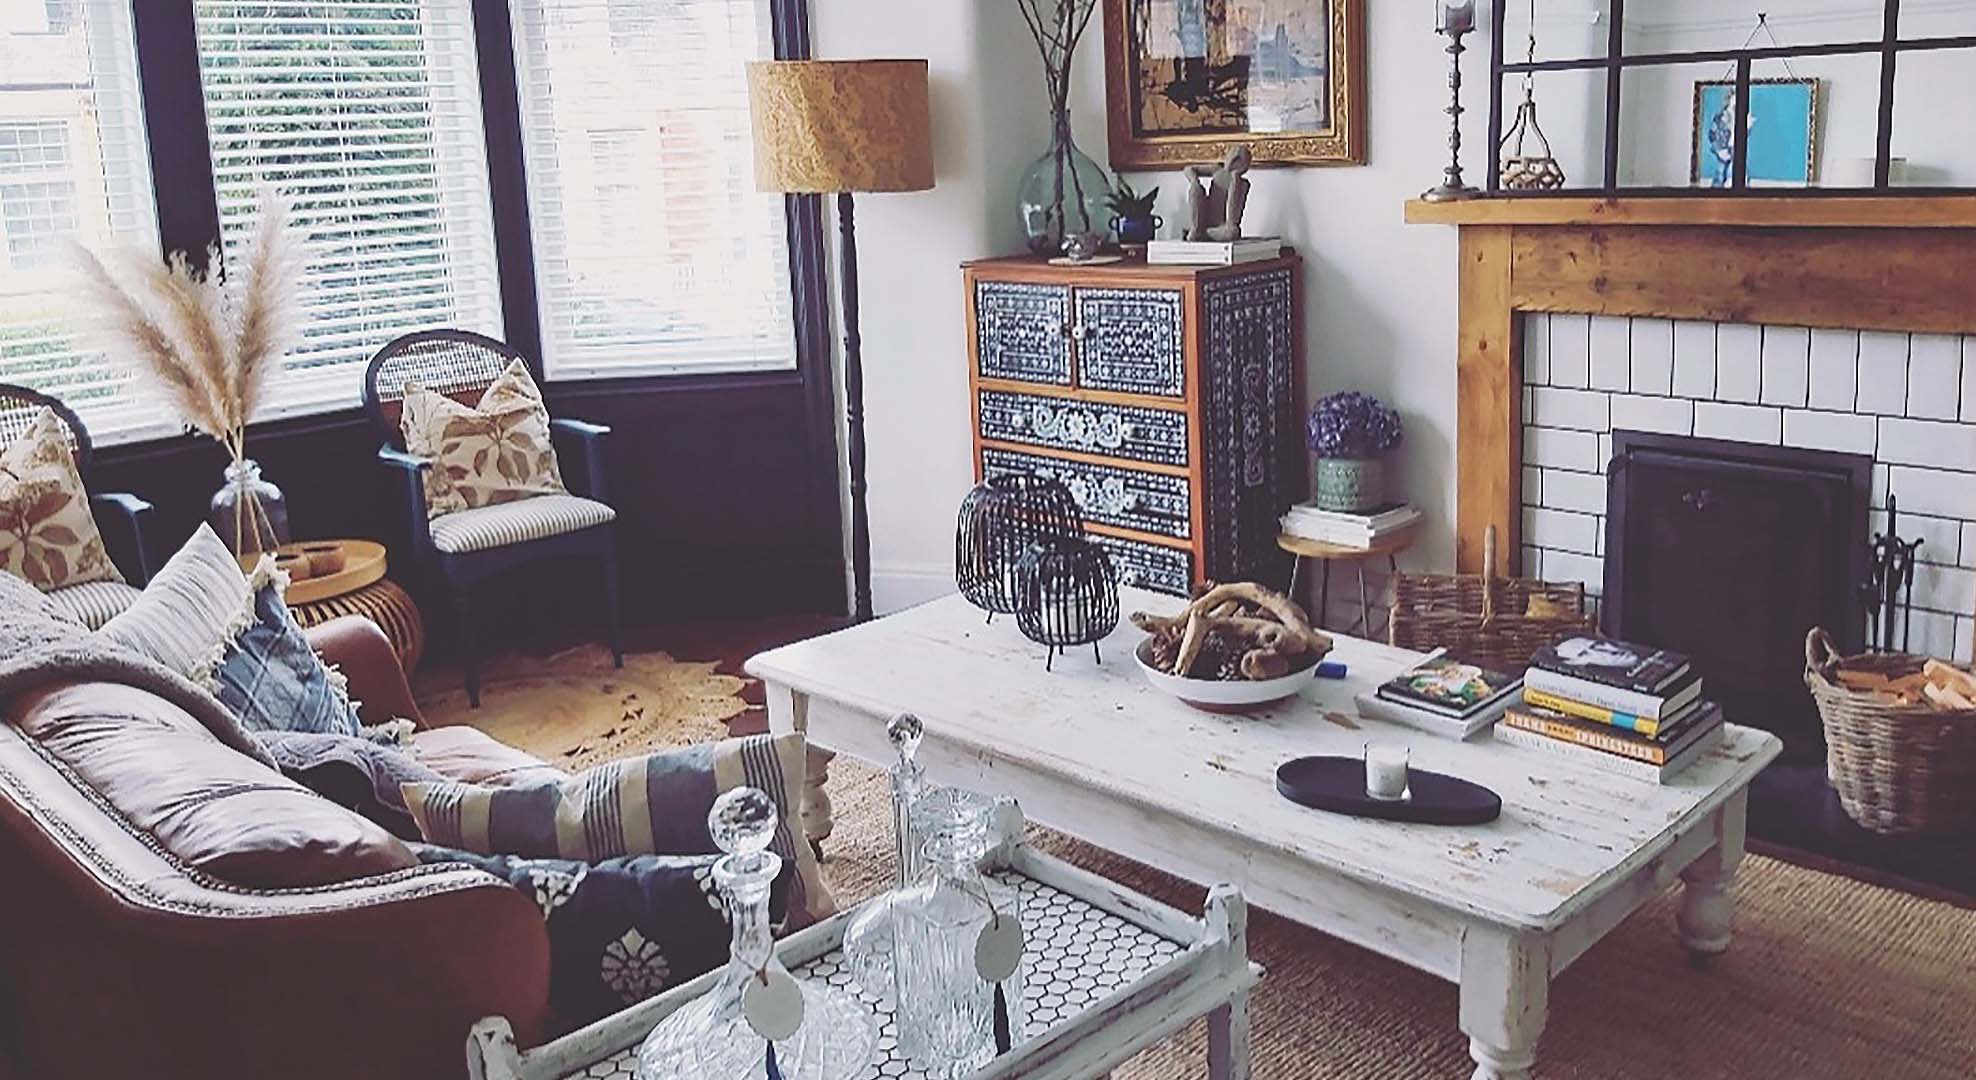 Photo of a living room furnished second-hand and upcycled